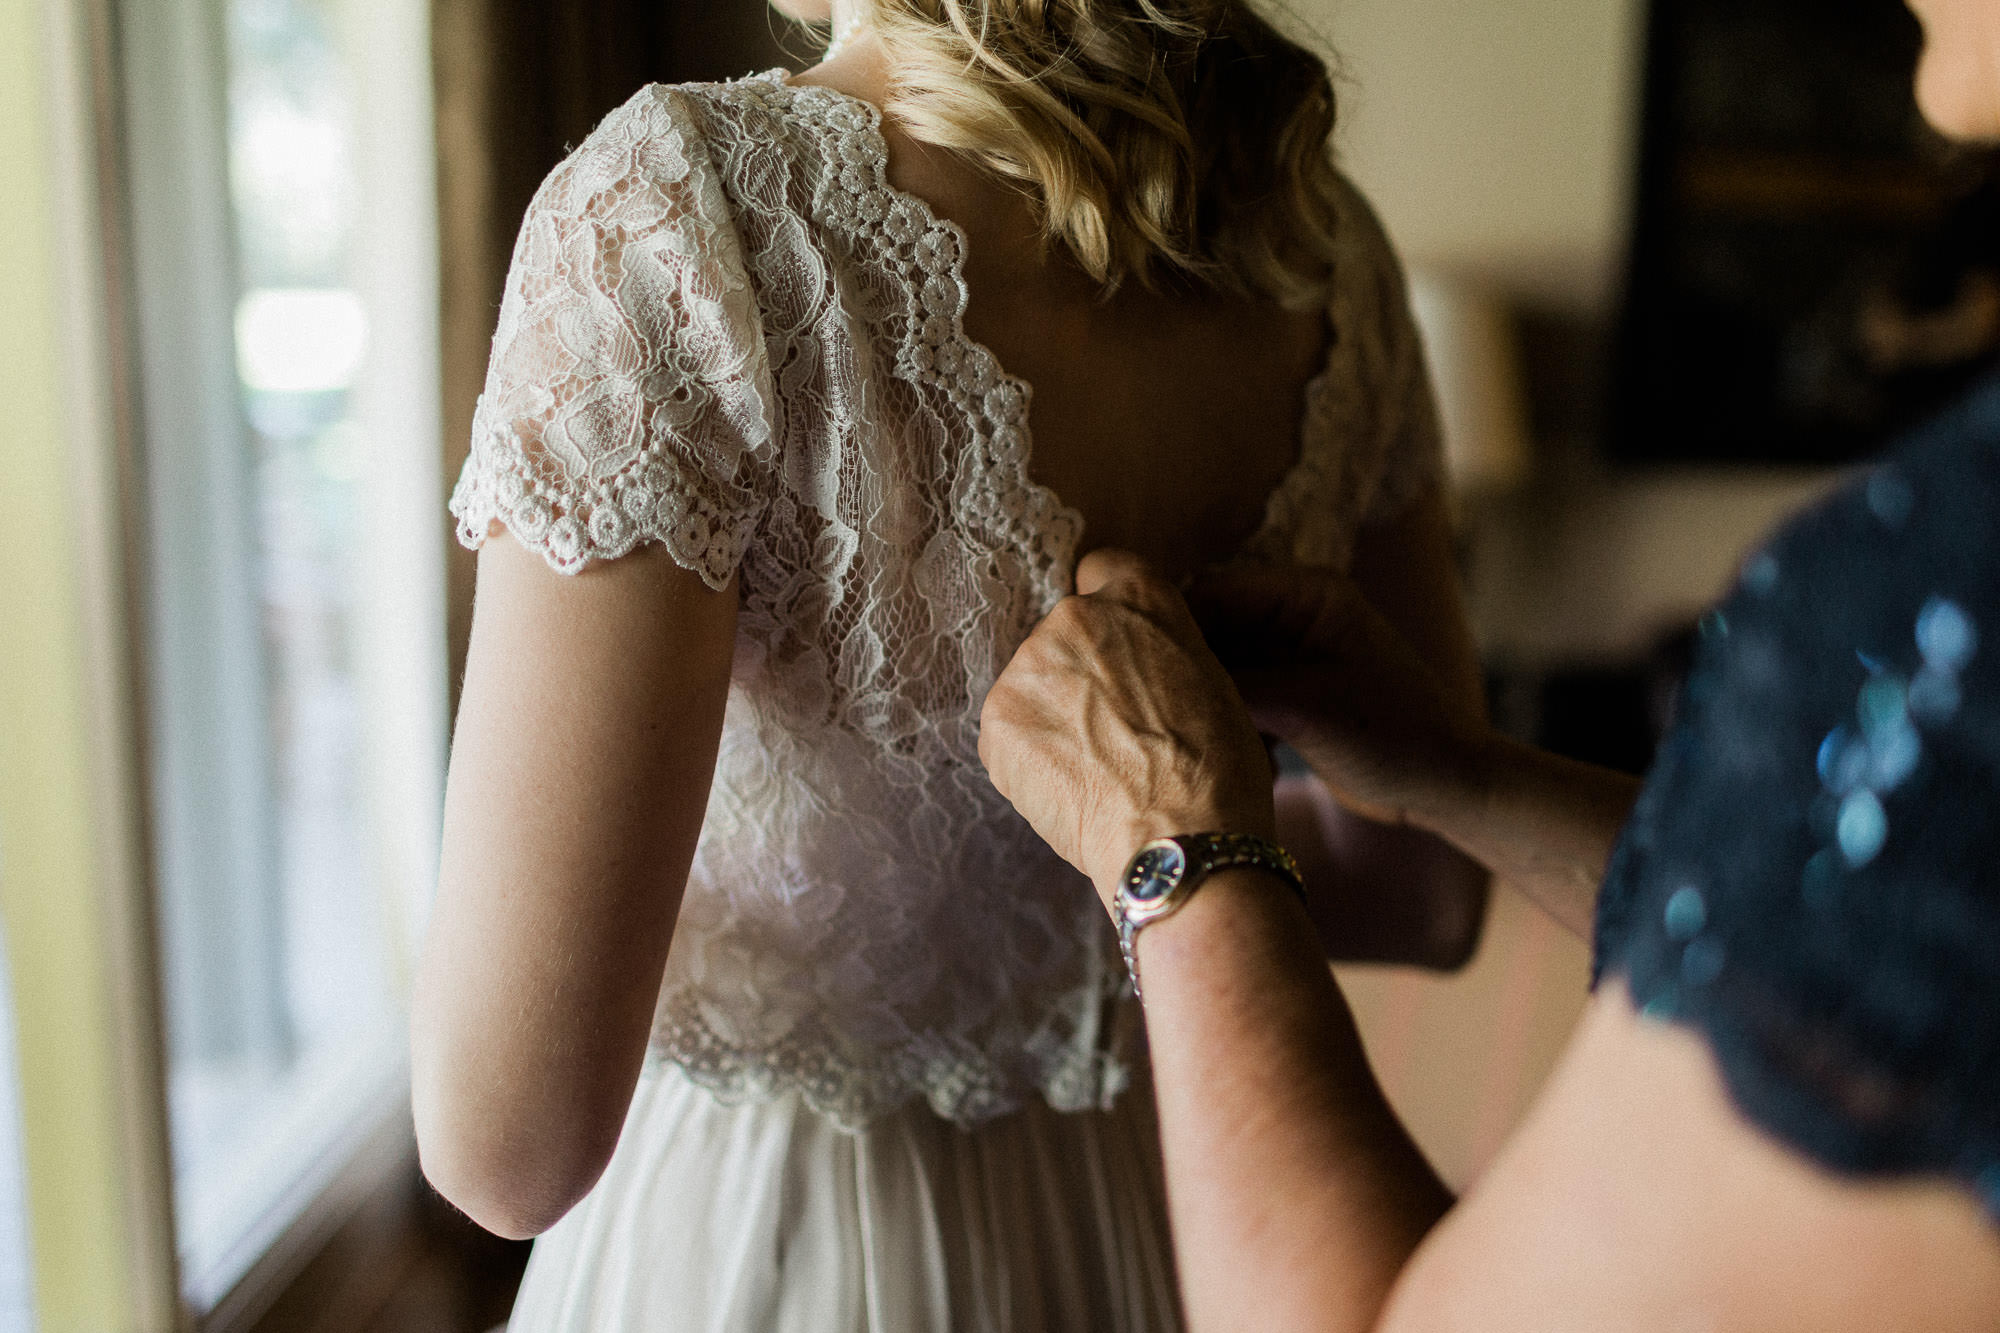 The bride's mother helps button up the bride's dress in Sunriver Oregon.